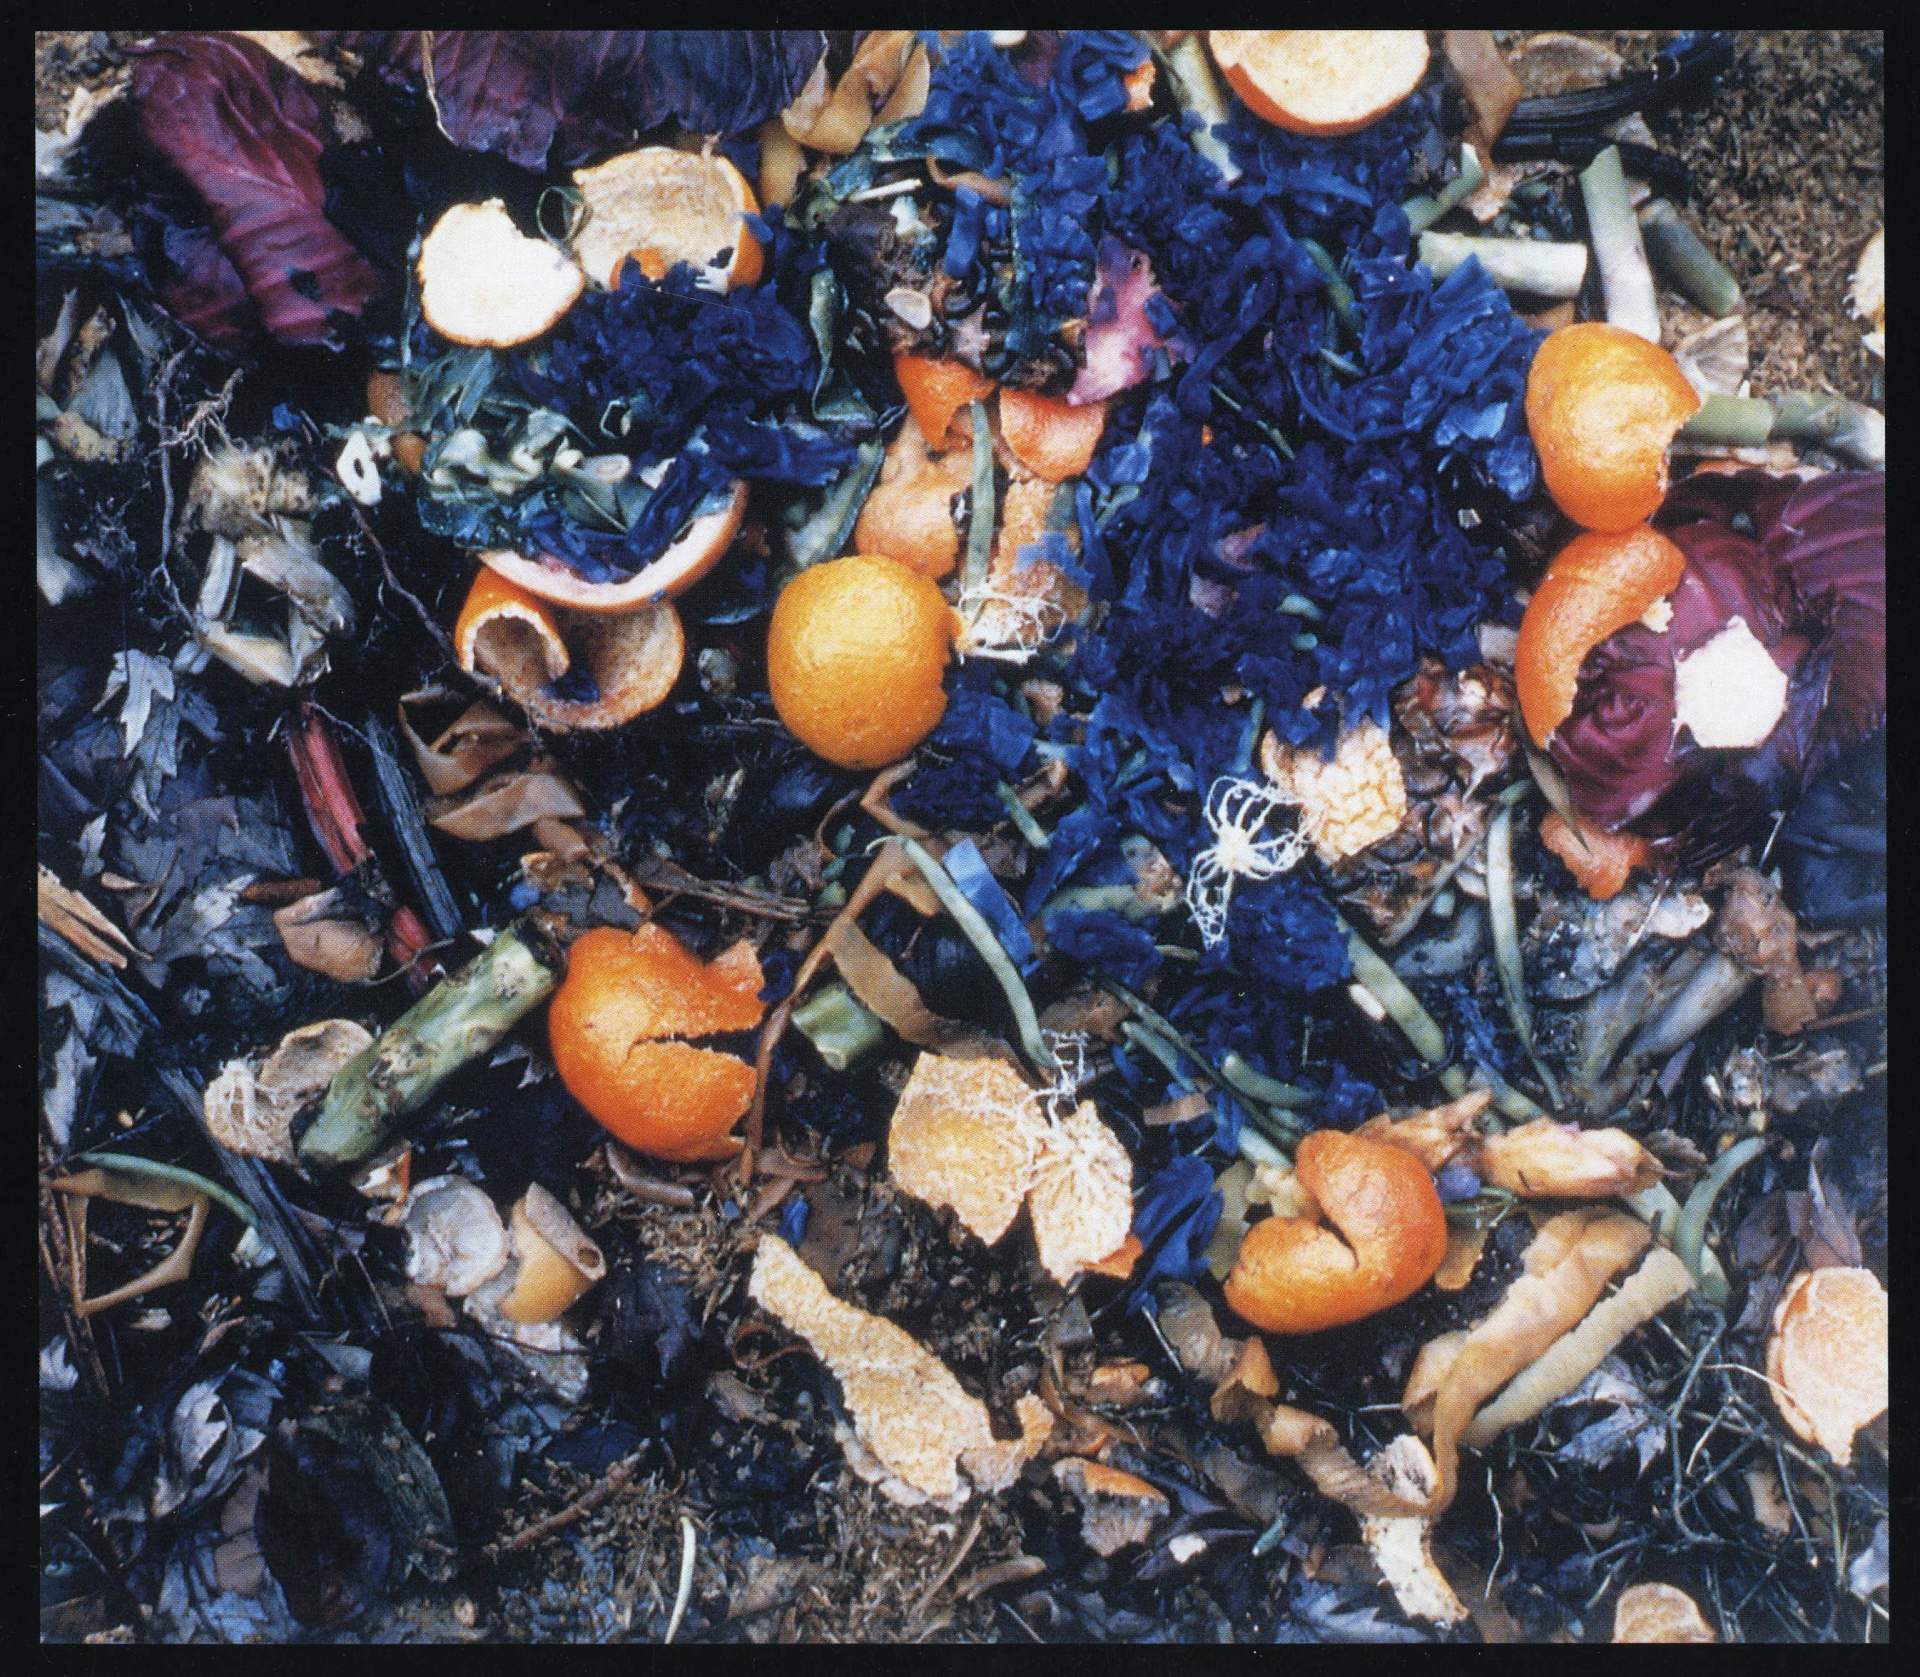 Image of "Compost Pile" (December 27, 1992), Ektacolor photograph by John Pfahl on flyer for "Decompositions" (2000) exhibition.